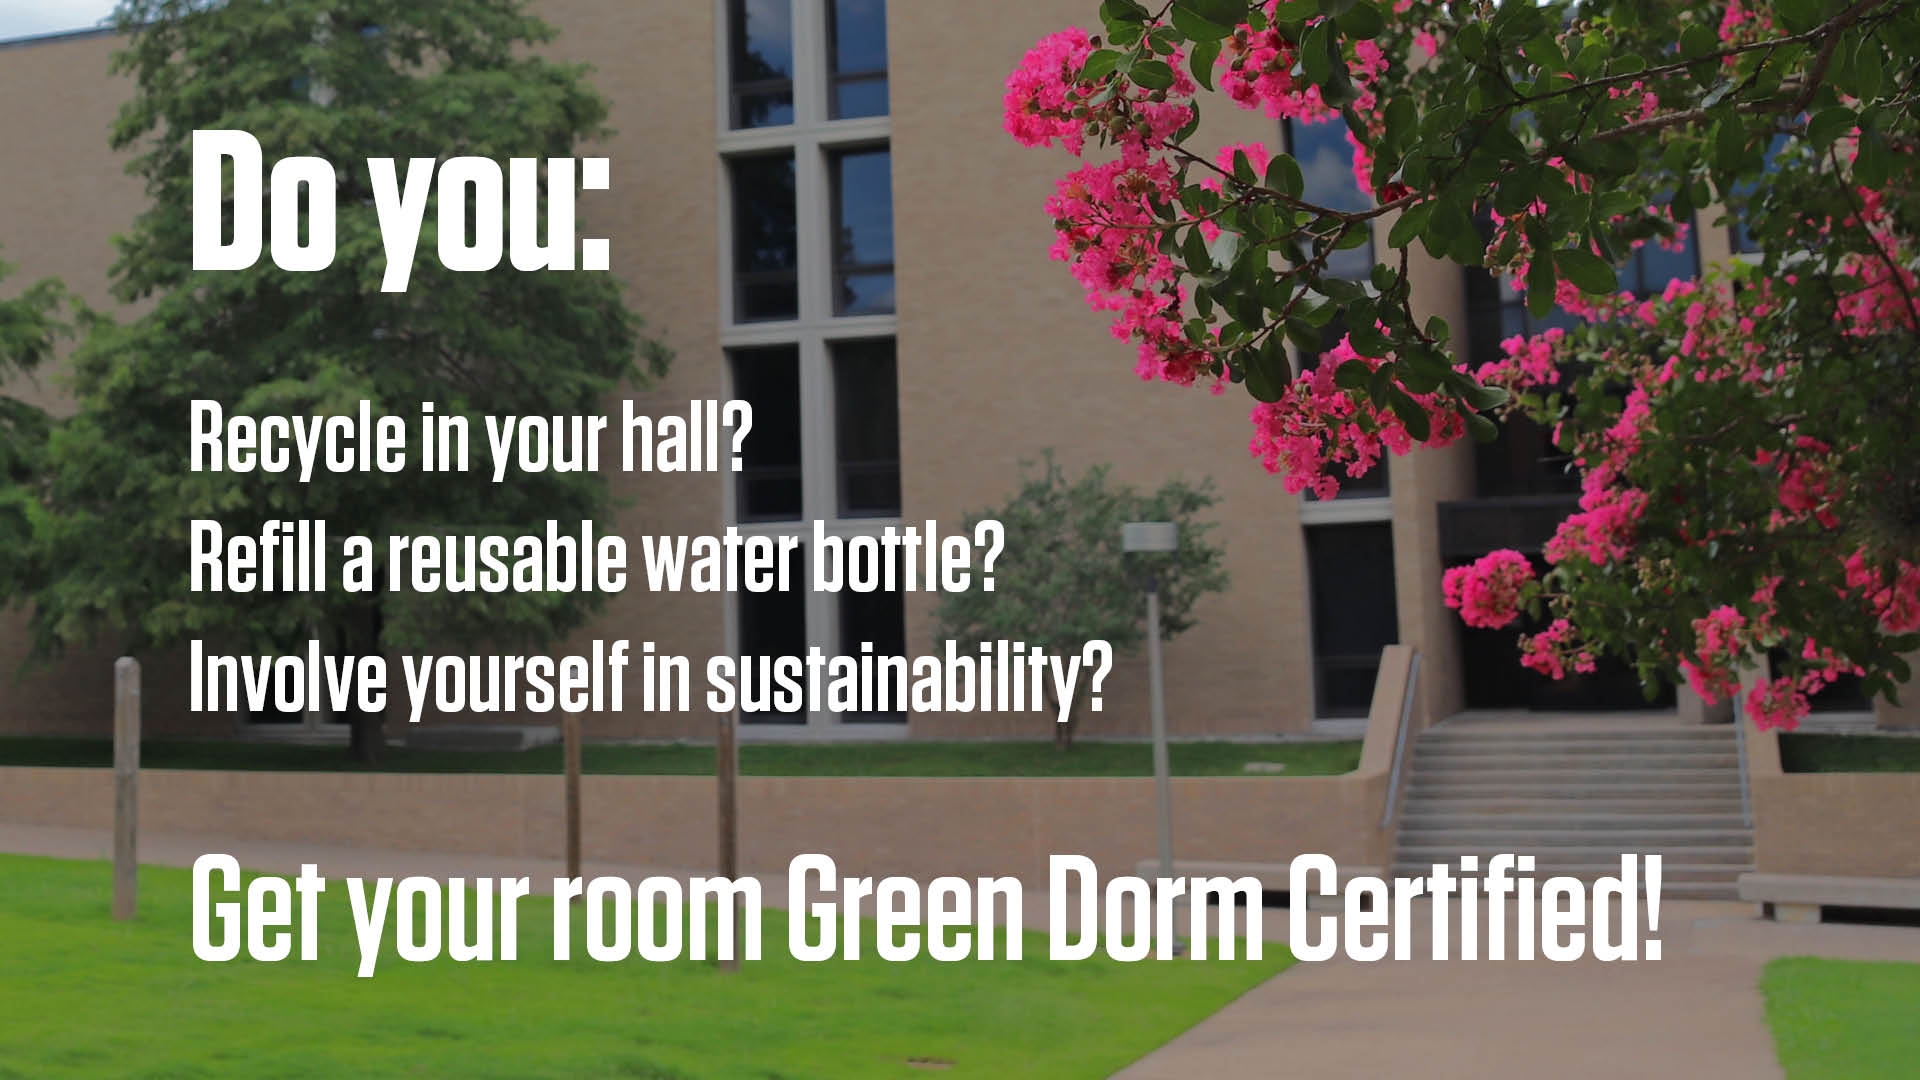 Find out more about Green Dorm Certification